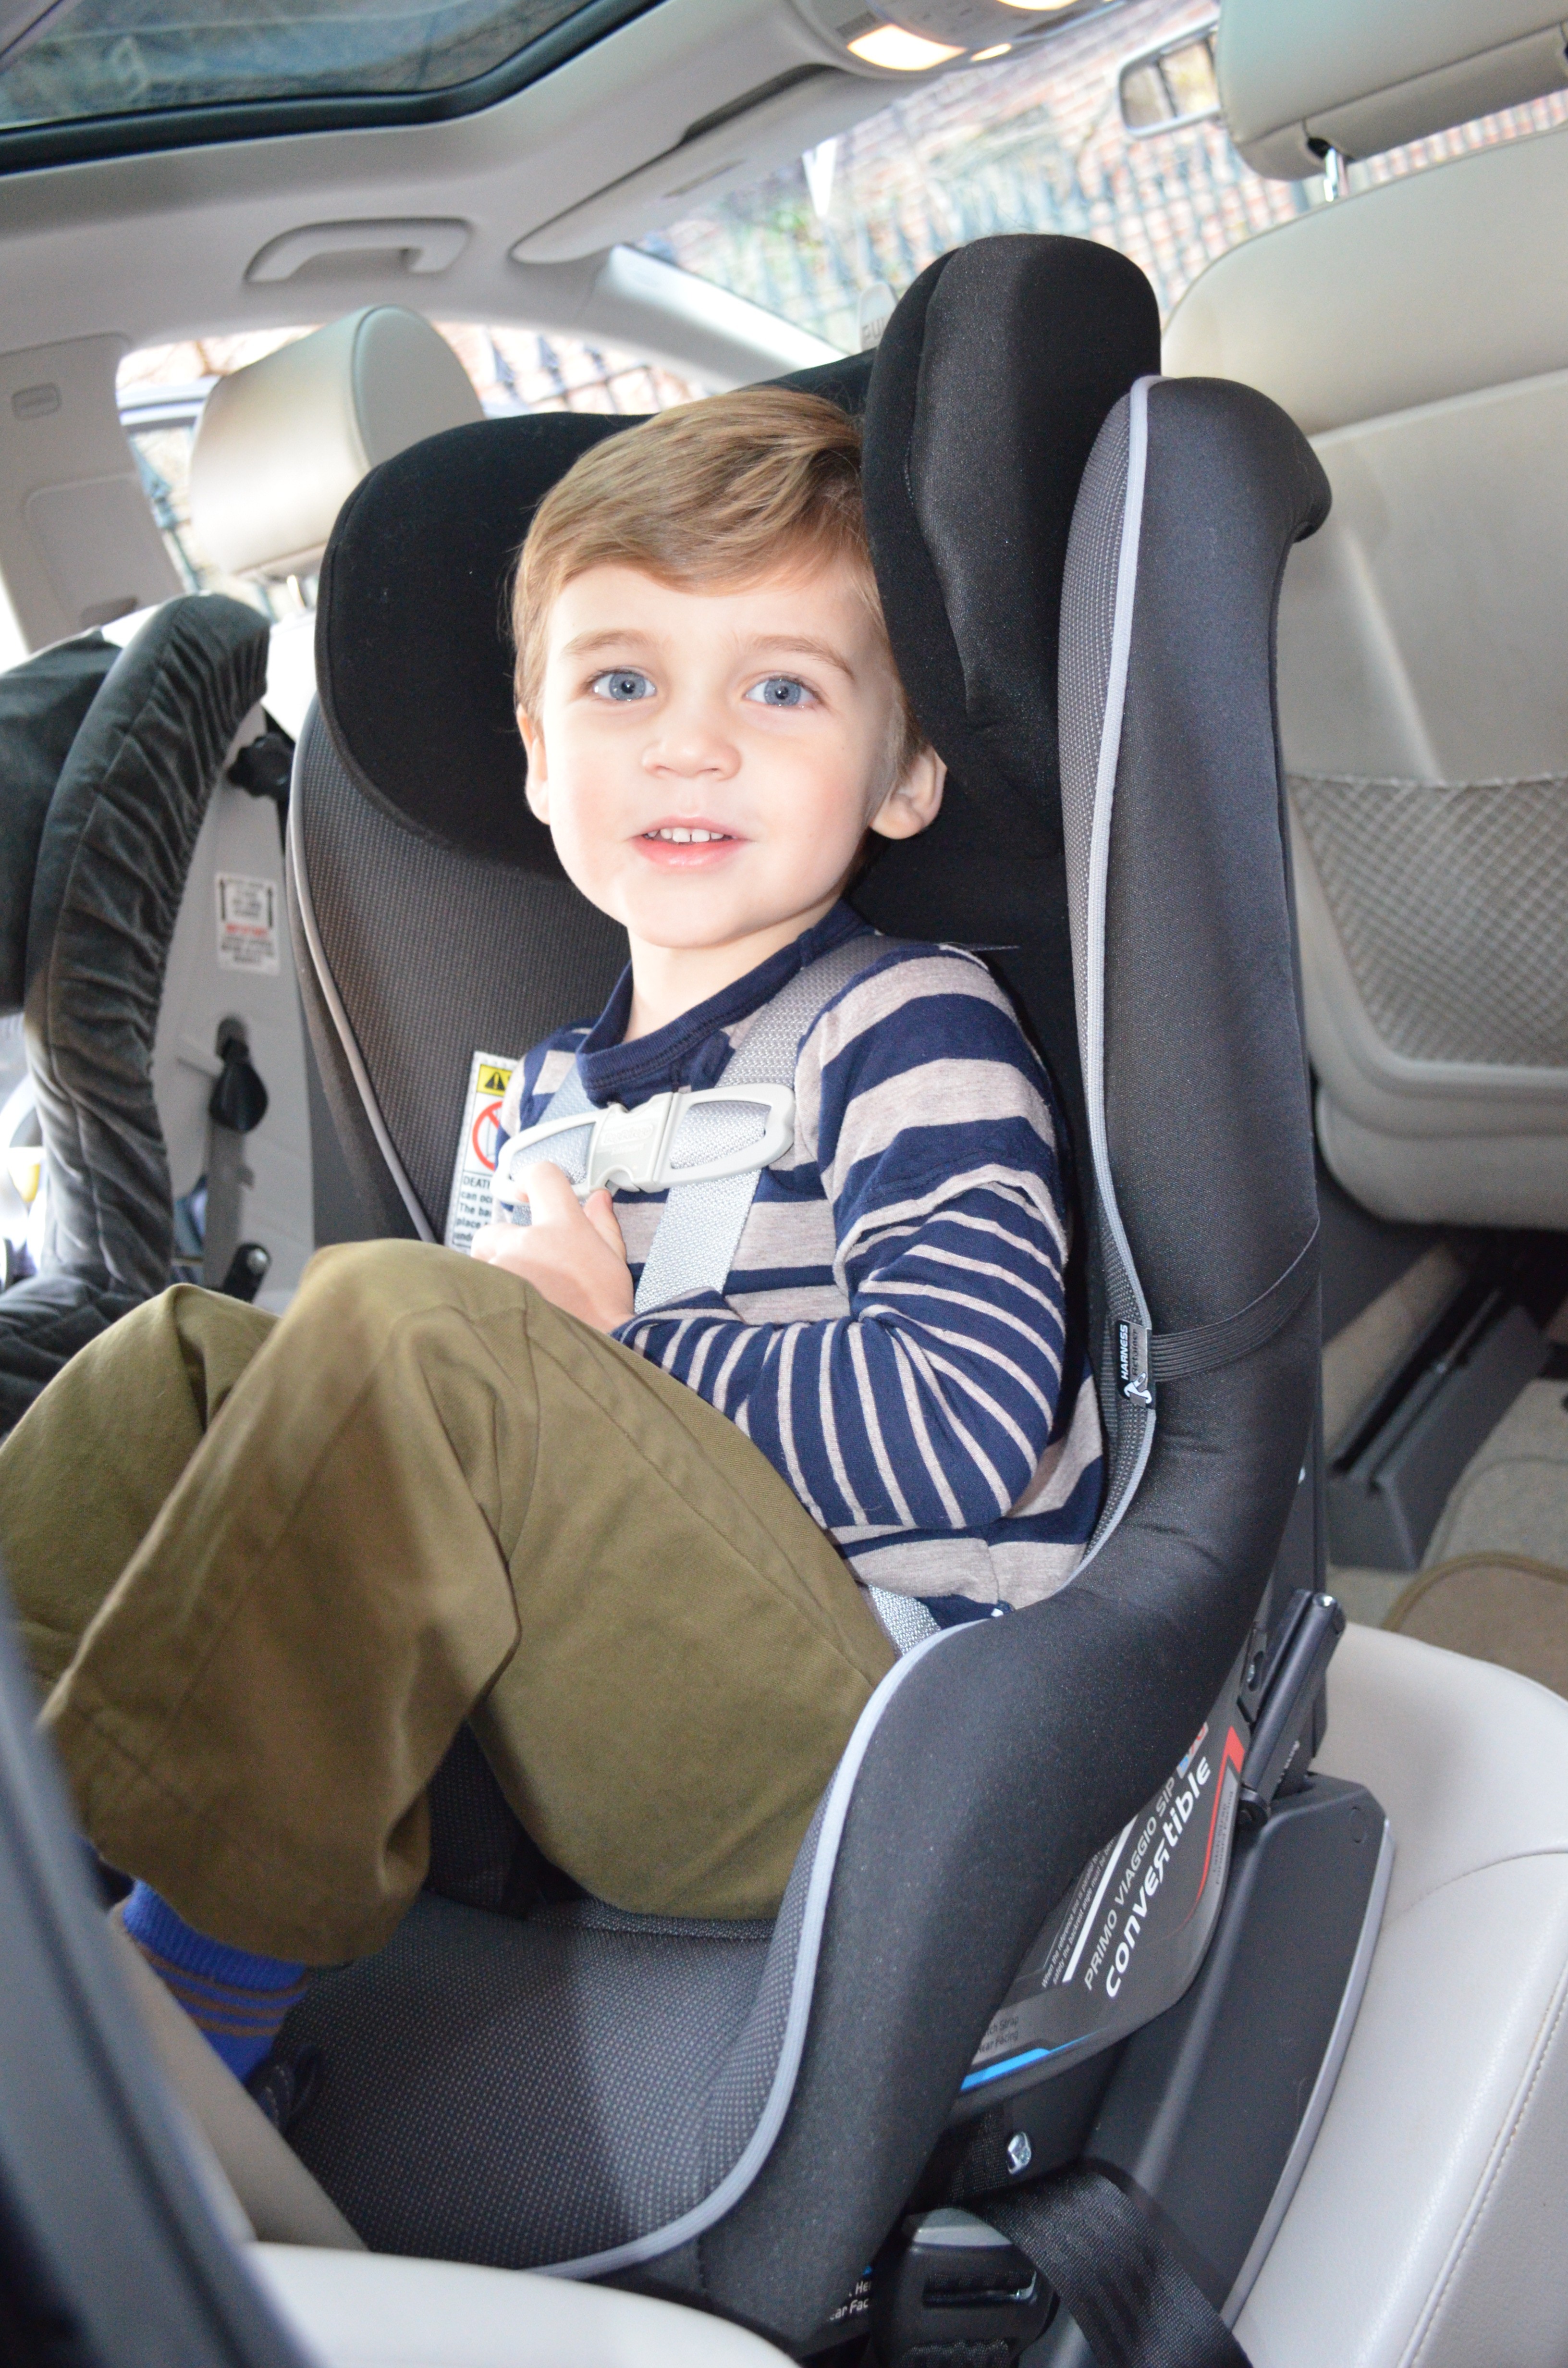 Your Child Turn Forward Facing, At What Age Or Weight Can A Child Sit In Forward Facing Car Seat